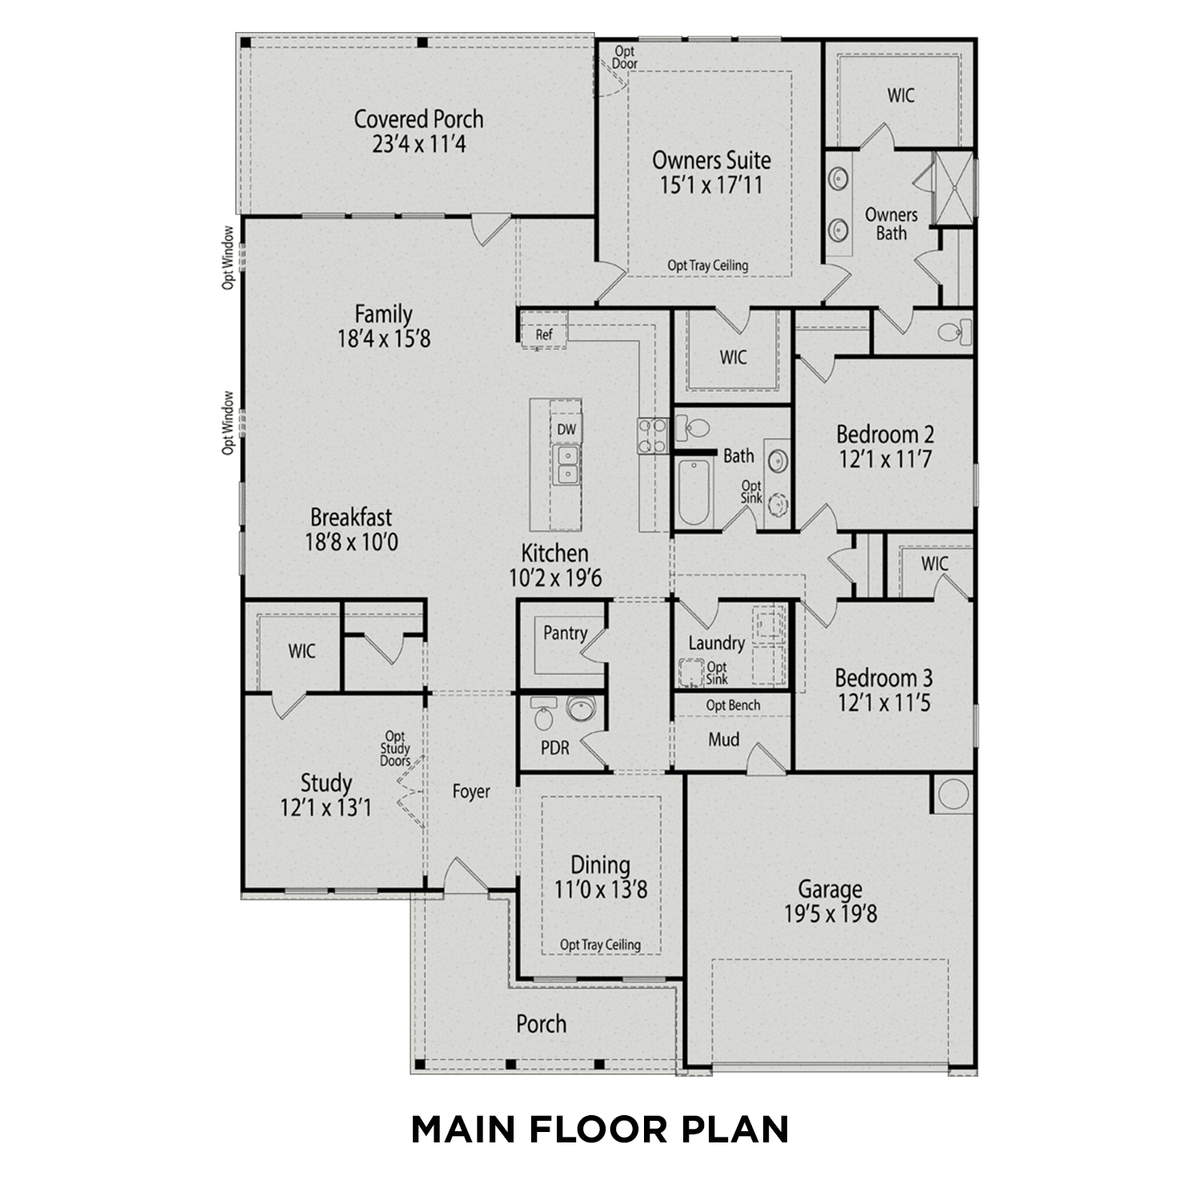 1 - The Magnolia A floor plan layout for 225 Highland Ridge Lane in Davidson Homes' Glenmere community.